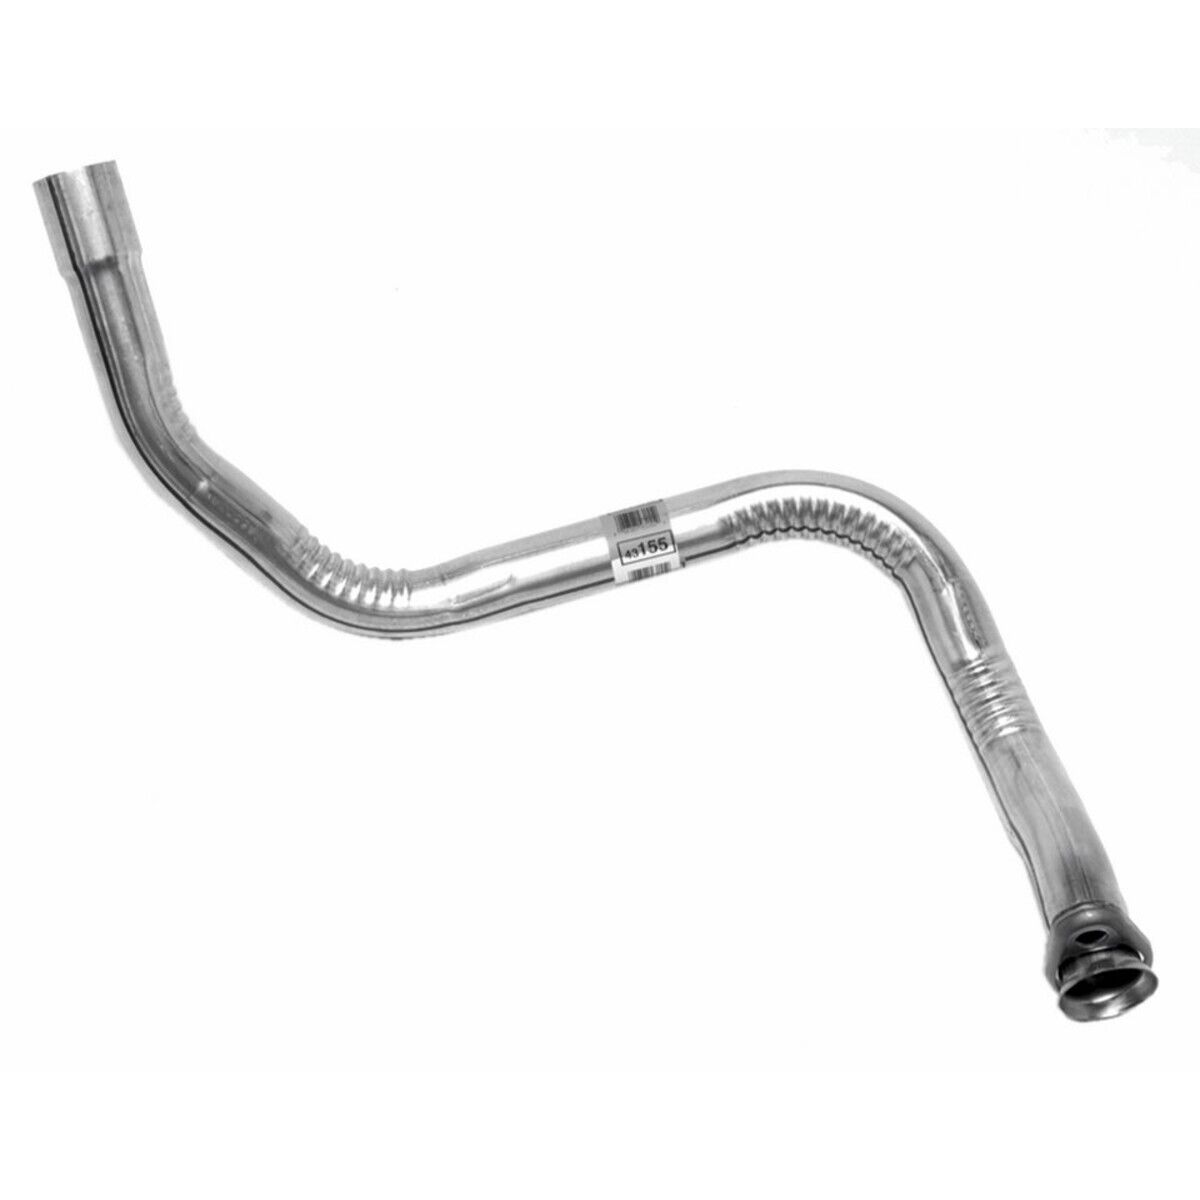 43155 Walker Exhaust Pipe for Chevy S10 Pickup S15 Chevrolet S-10 GMC Sonoma